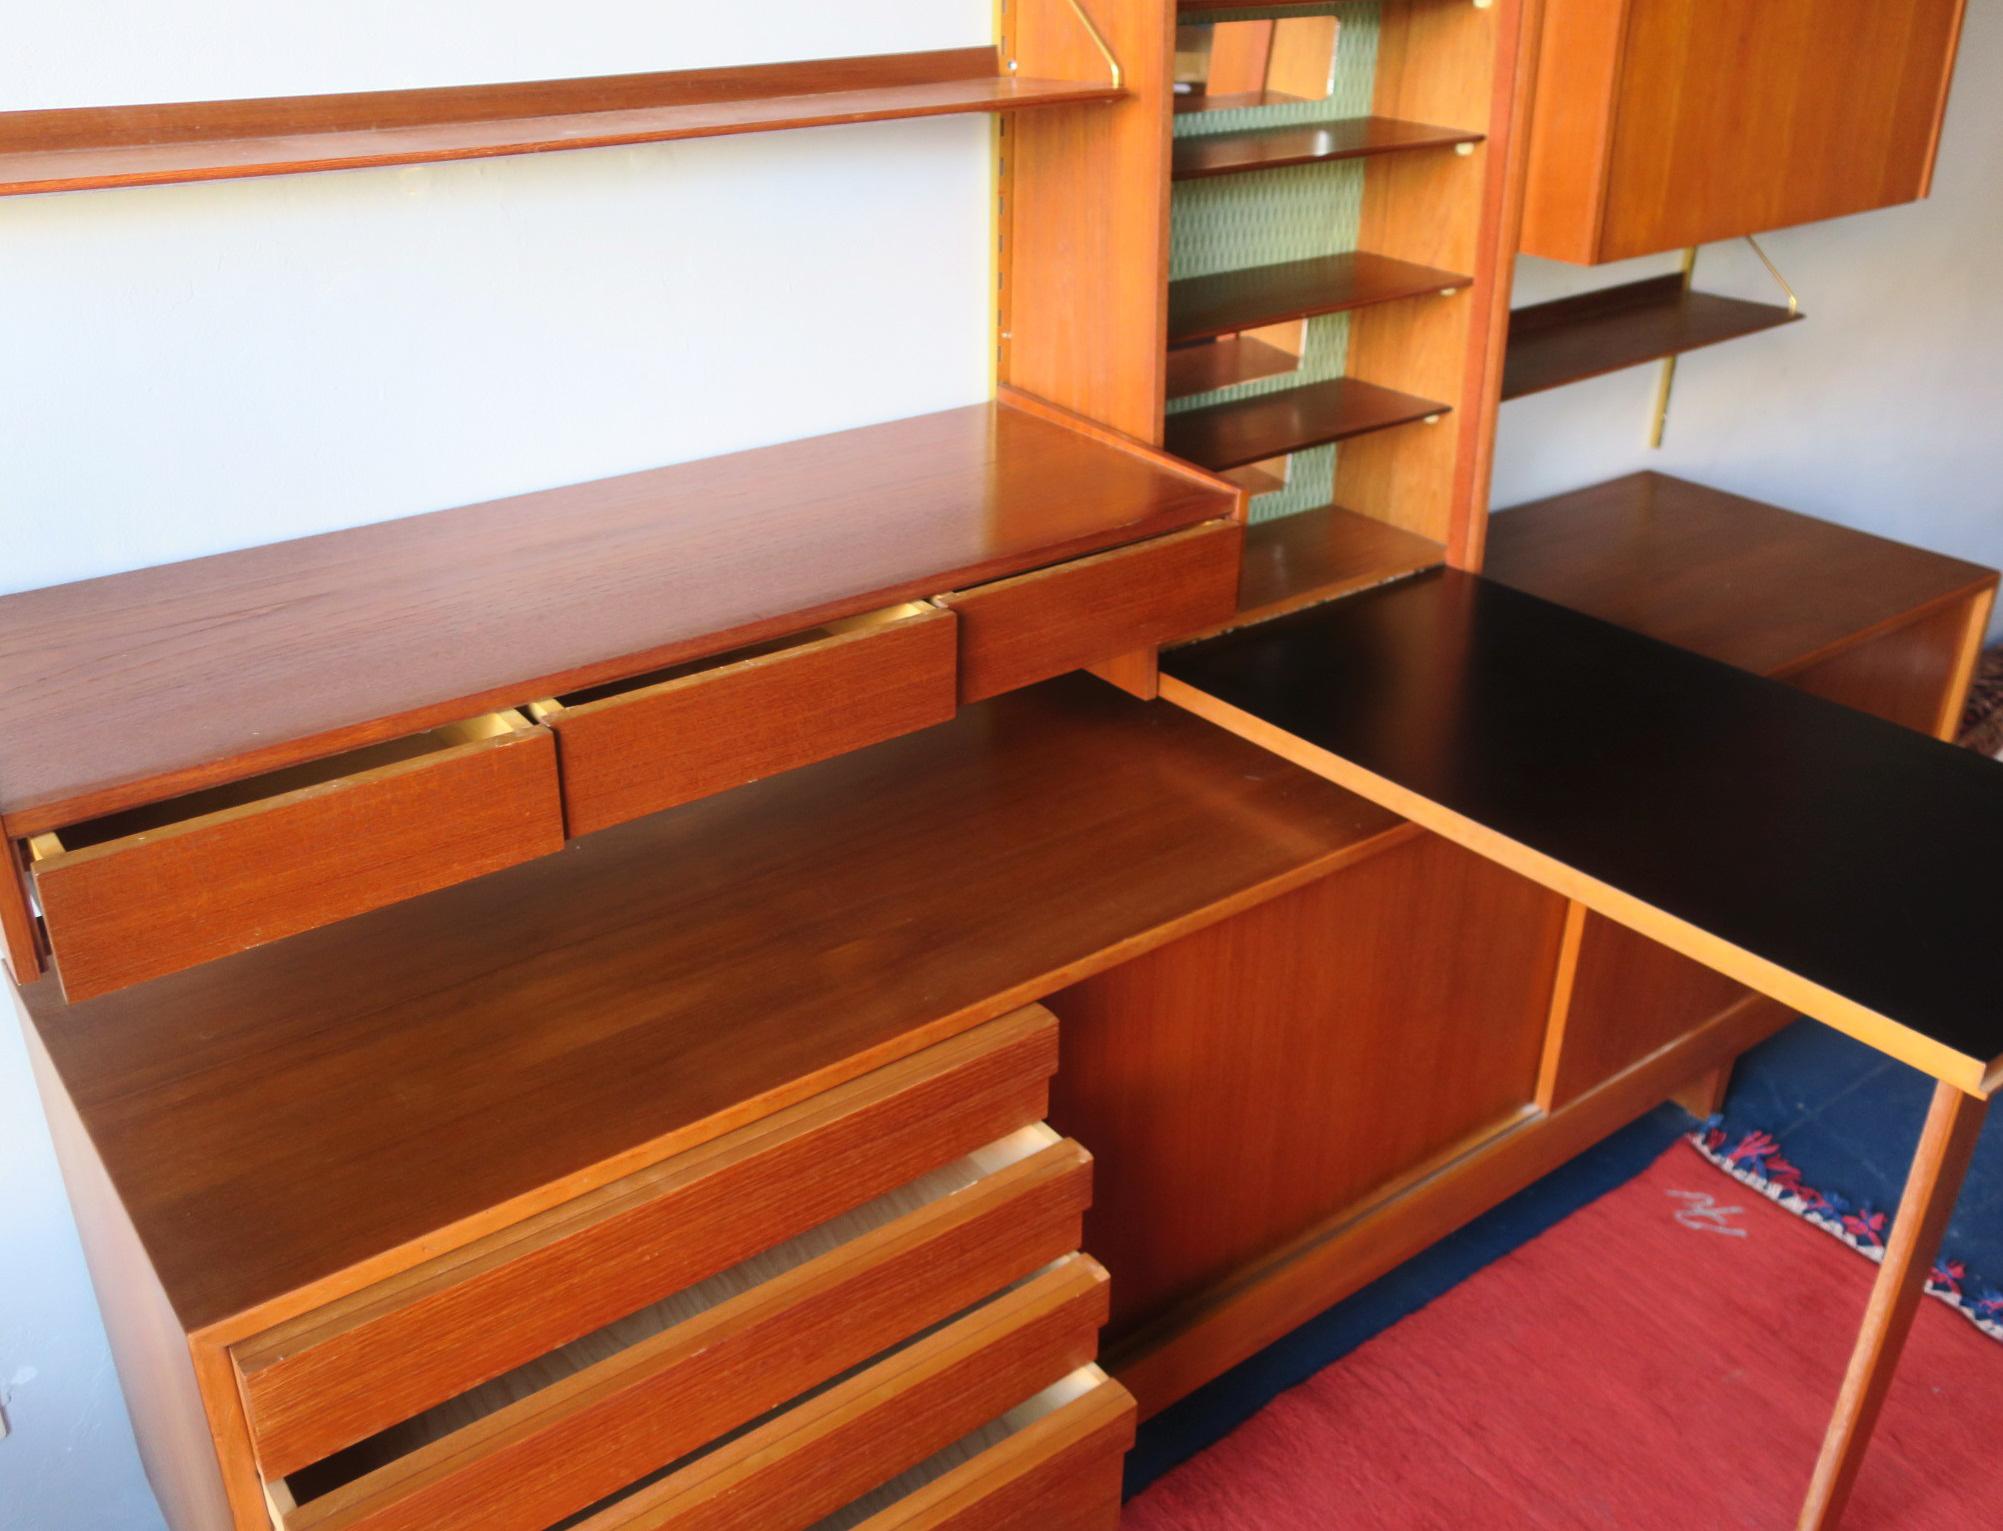 Midcentury Teak Modular Shelf System with Low Sideboard, 1960s For Sale 7